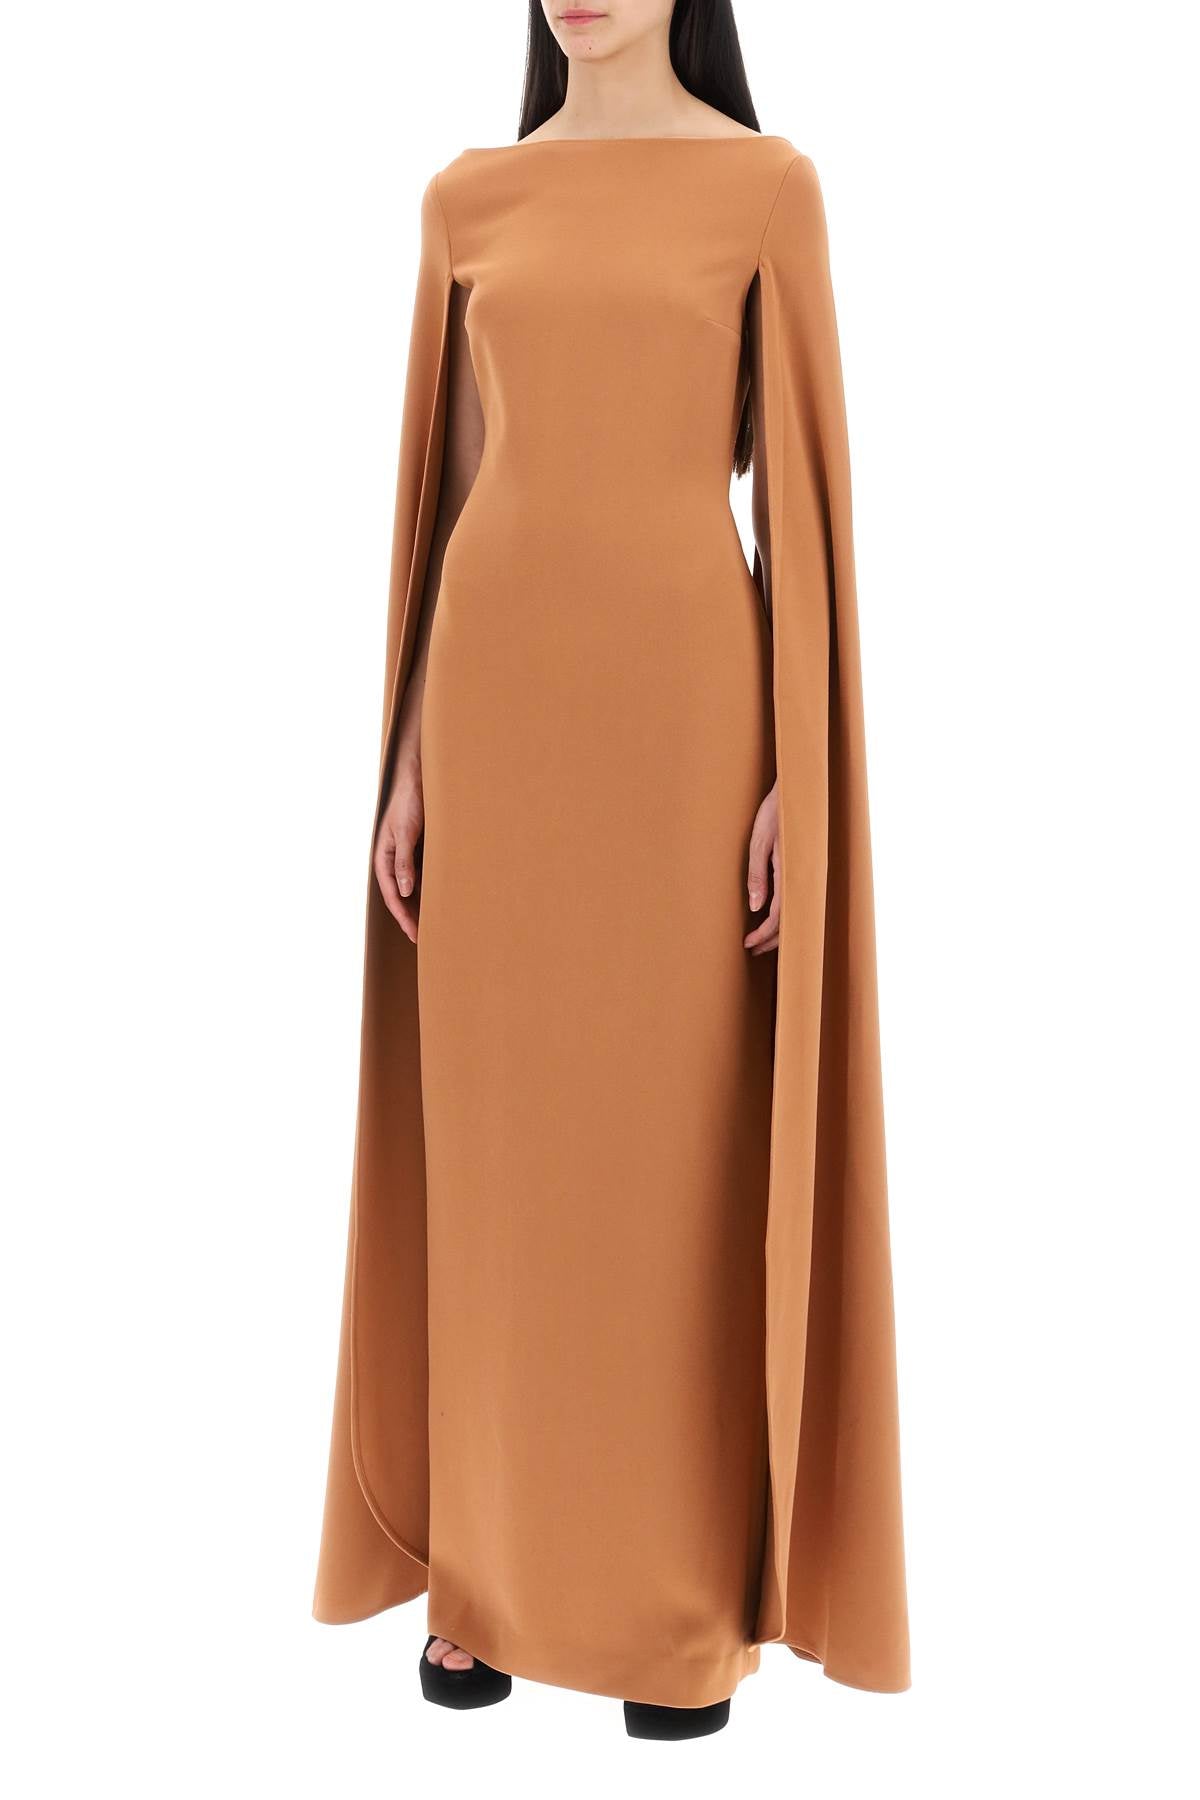 maxi dress sadie with cape sleeves-3